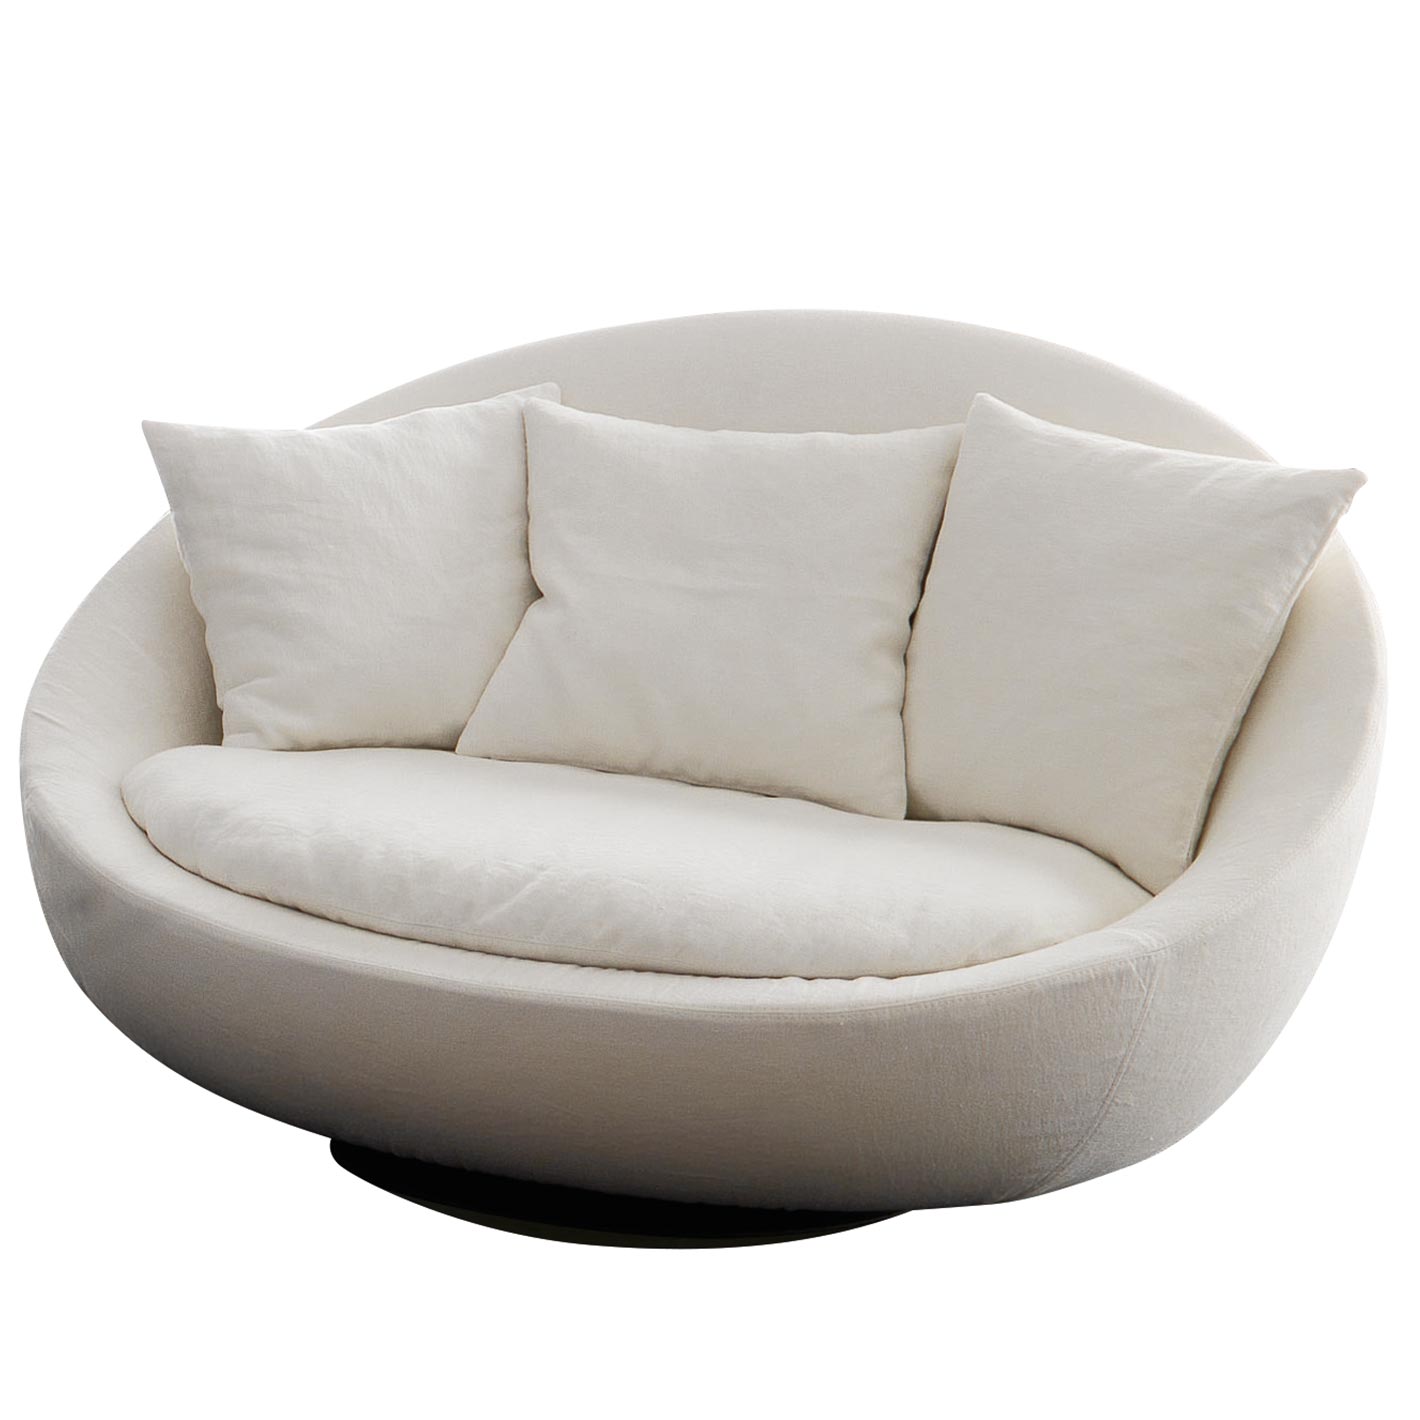 Outlet Sofas & Sessel - LACOON OUTLET Drehsessel